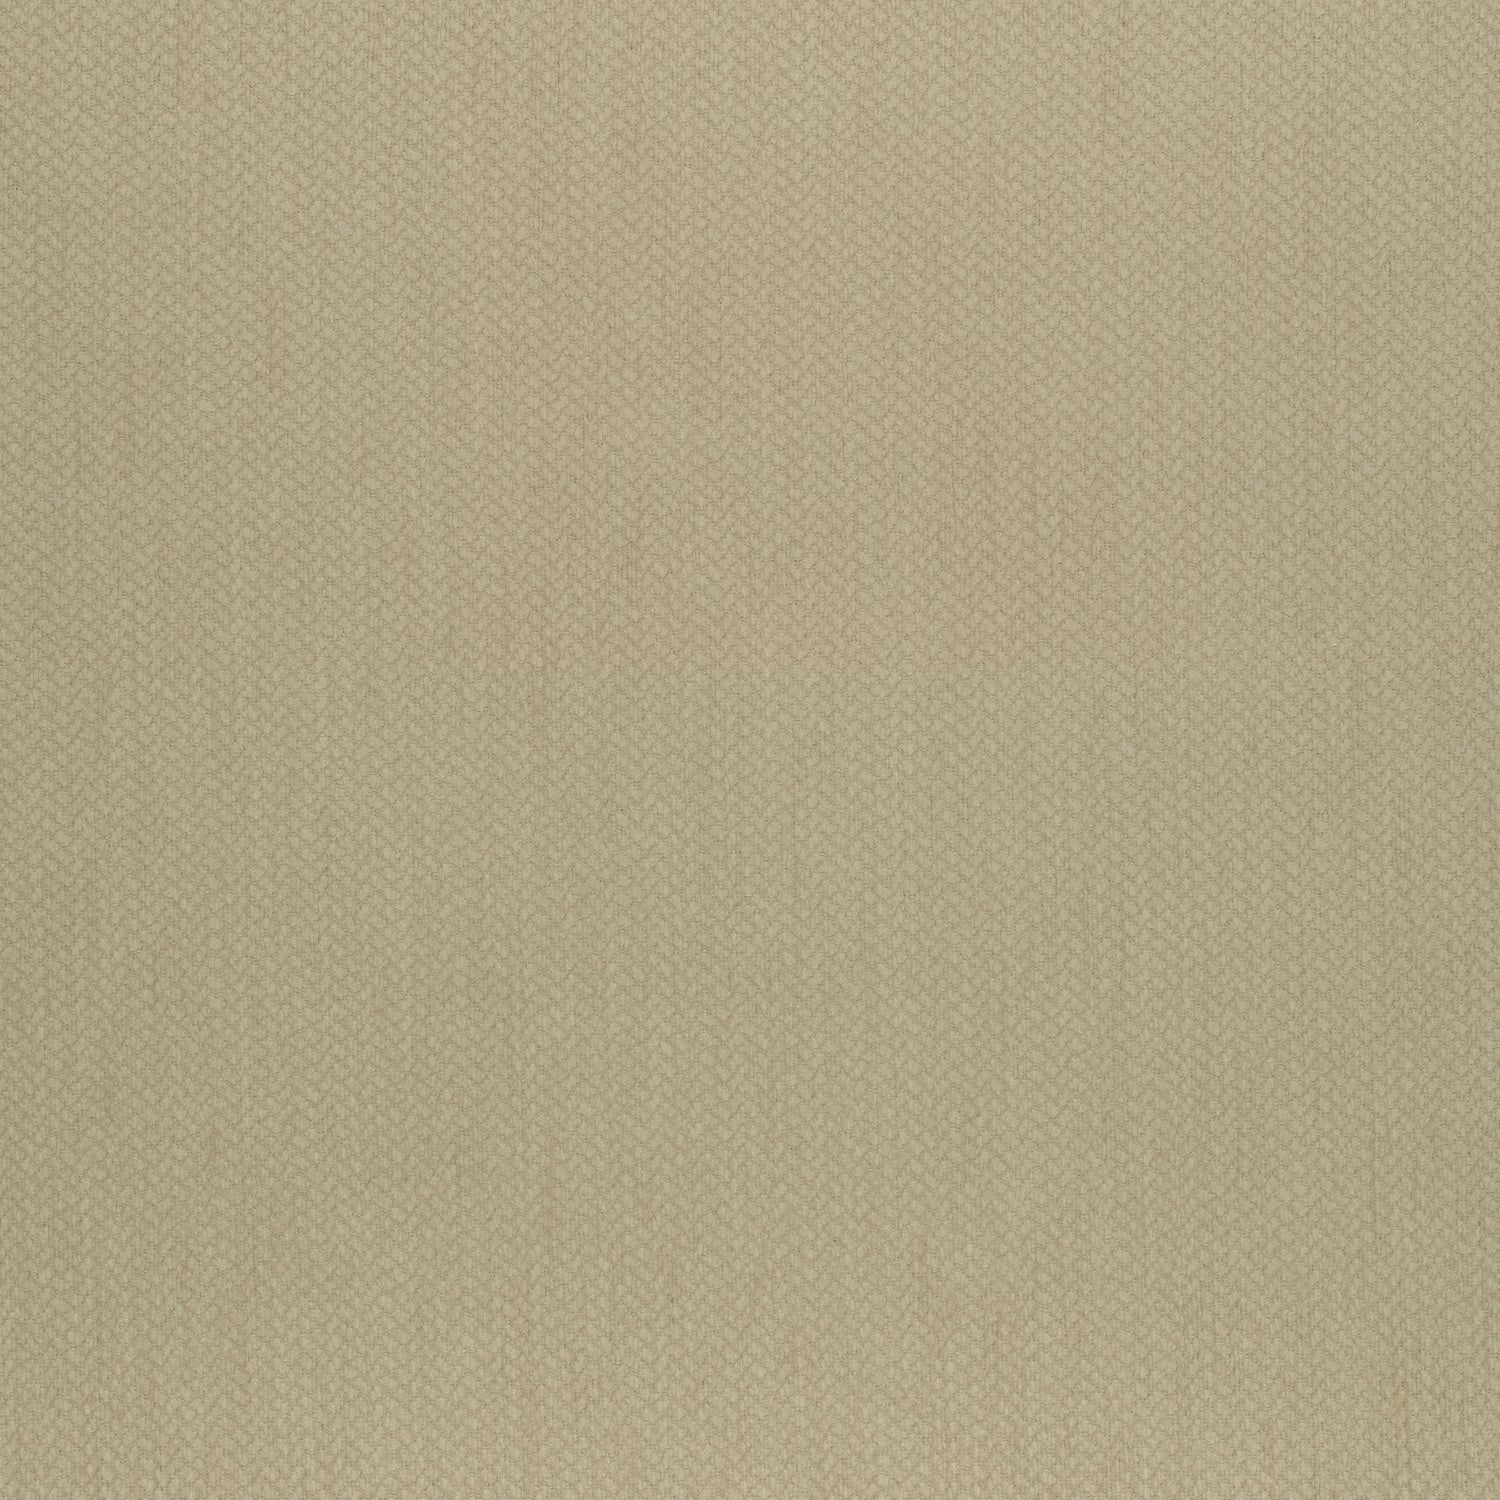 Orion fabric in sand color - pattern number W80474 - by Thibaut in the Mosaic collection